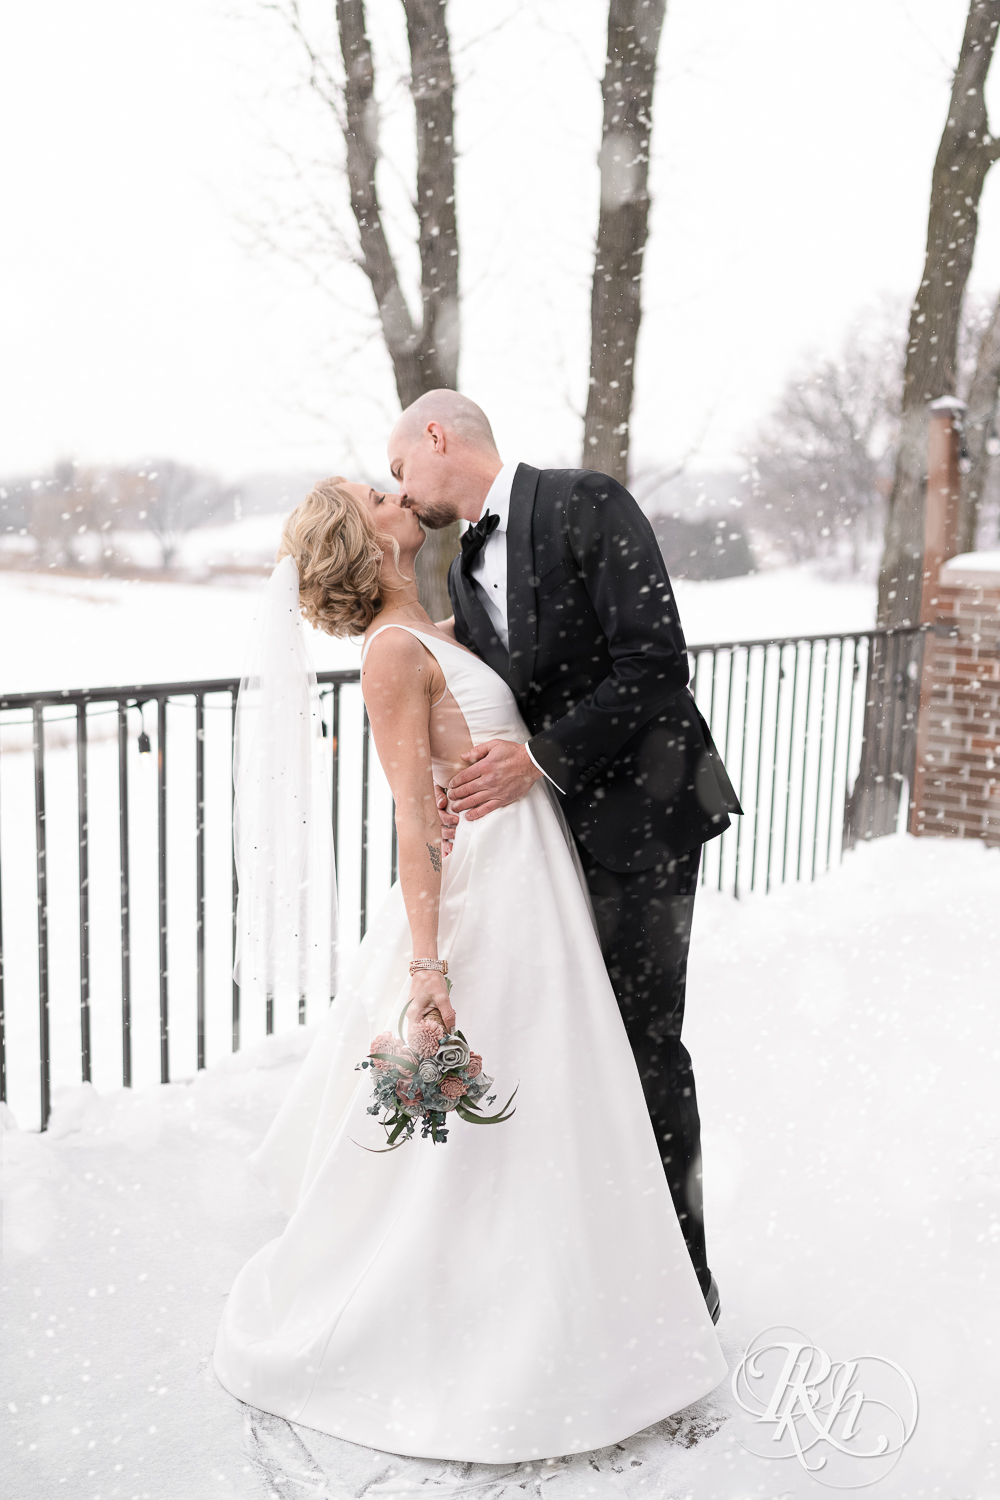 Bride and groom kissing in falling snow at Braemar Golf Course in Edina, Minnesota.